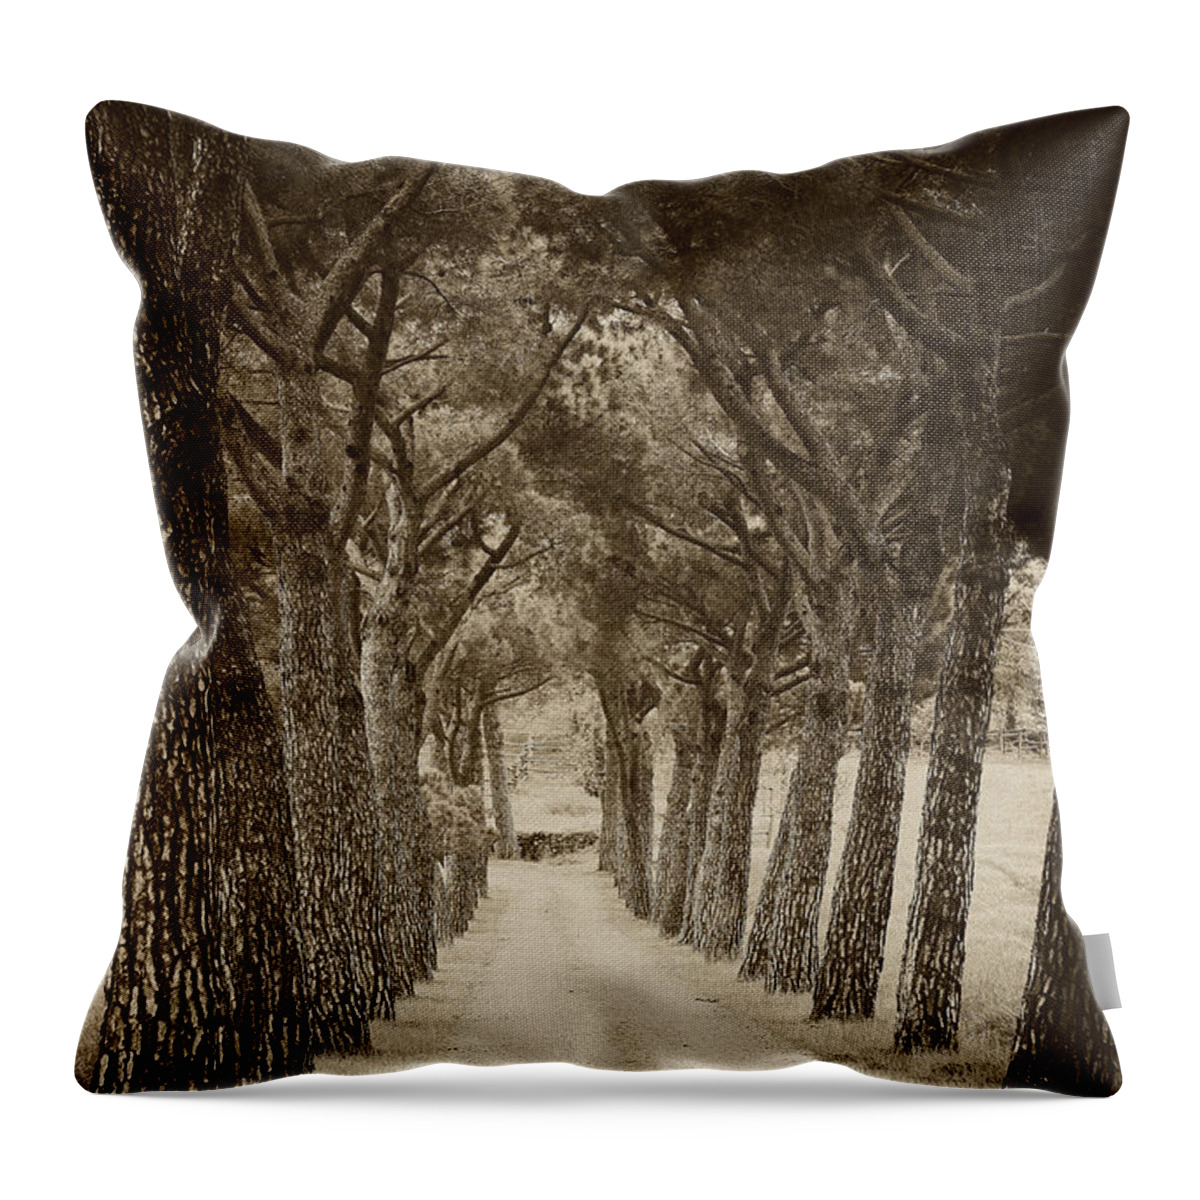 Tuscan Throw Pillow featuring the photograph Tuscan pines by Hugh Smith